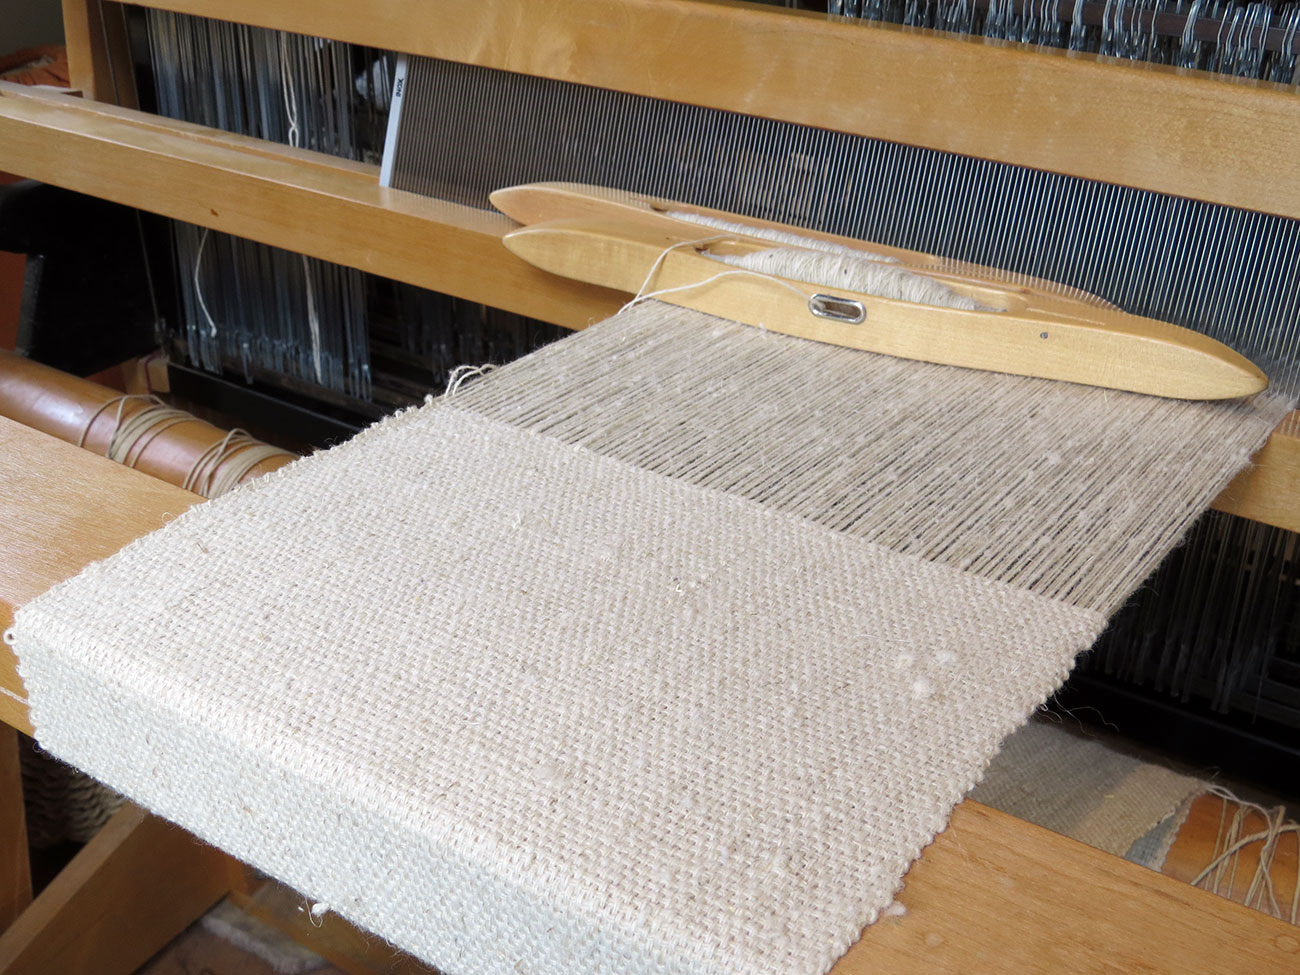 handwoven flax/wool cloth woven by Sandy Fisher of the Chico Flax Project